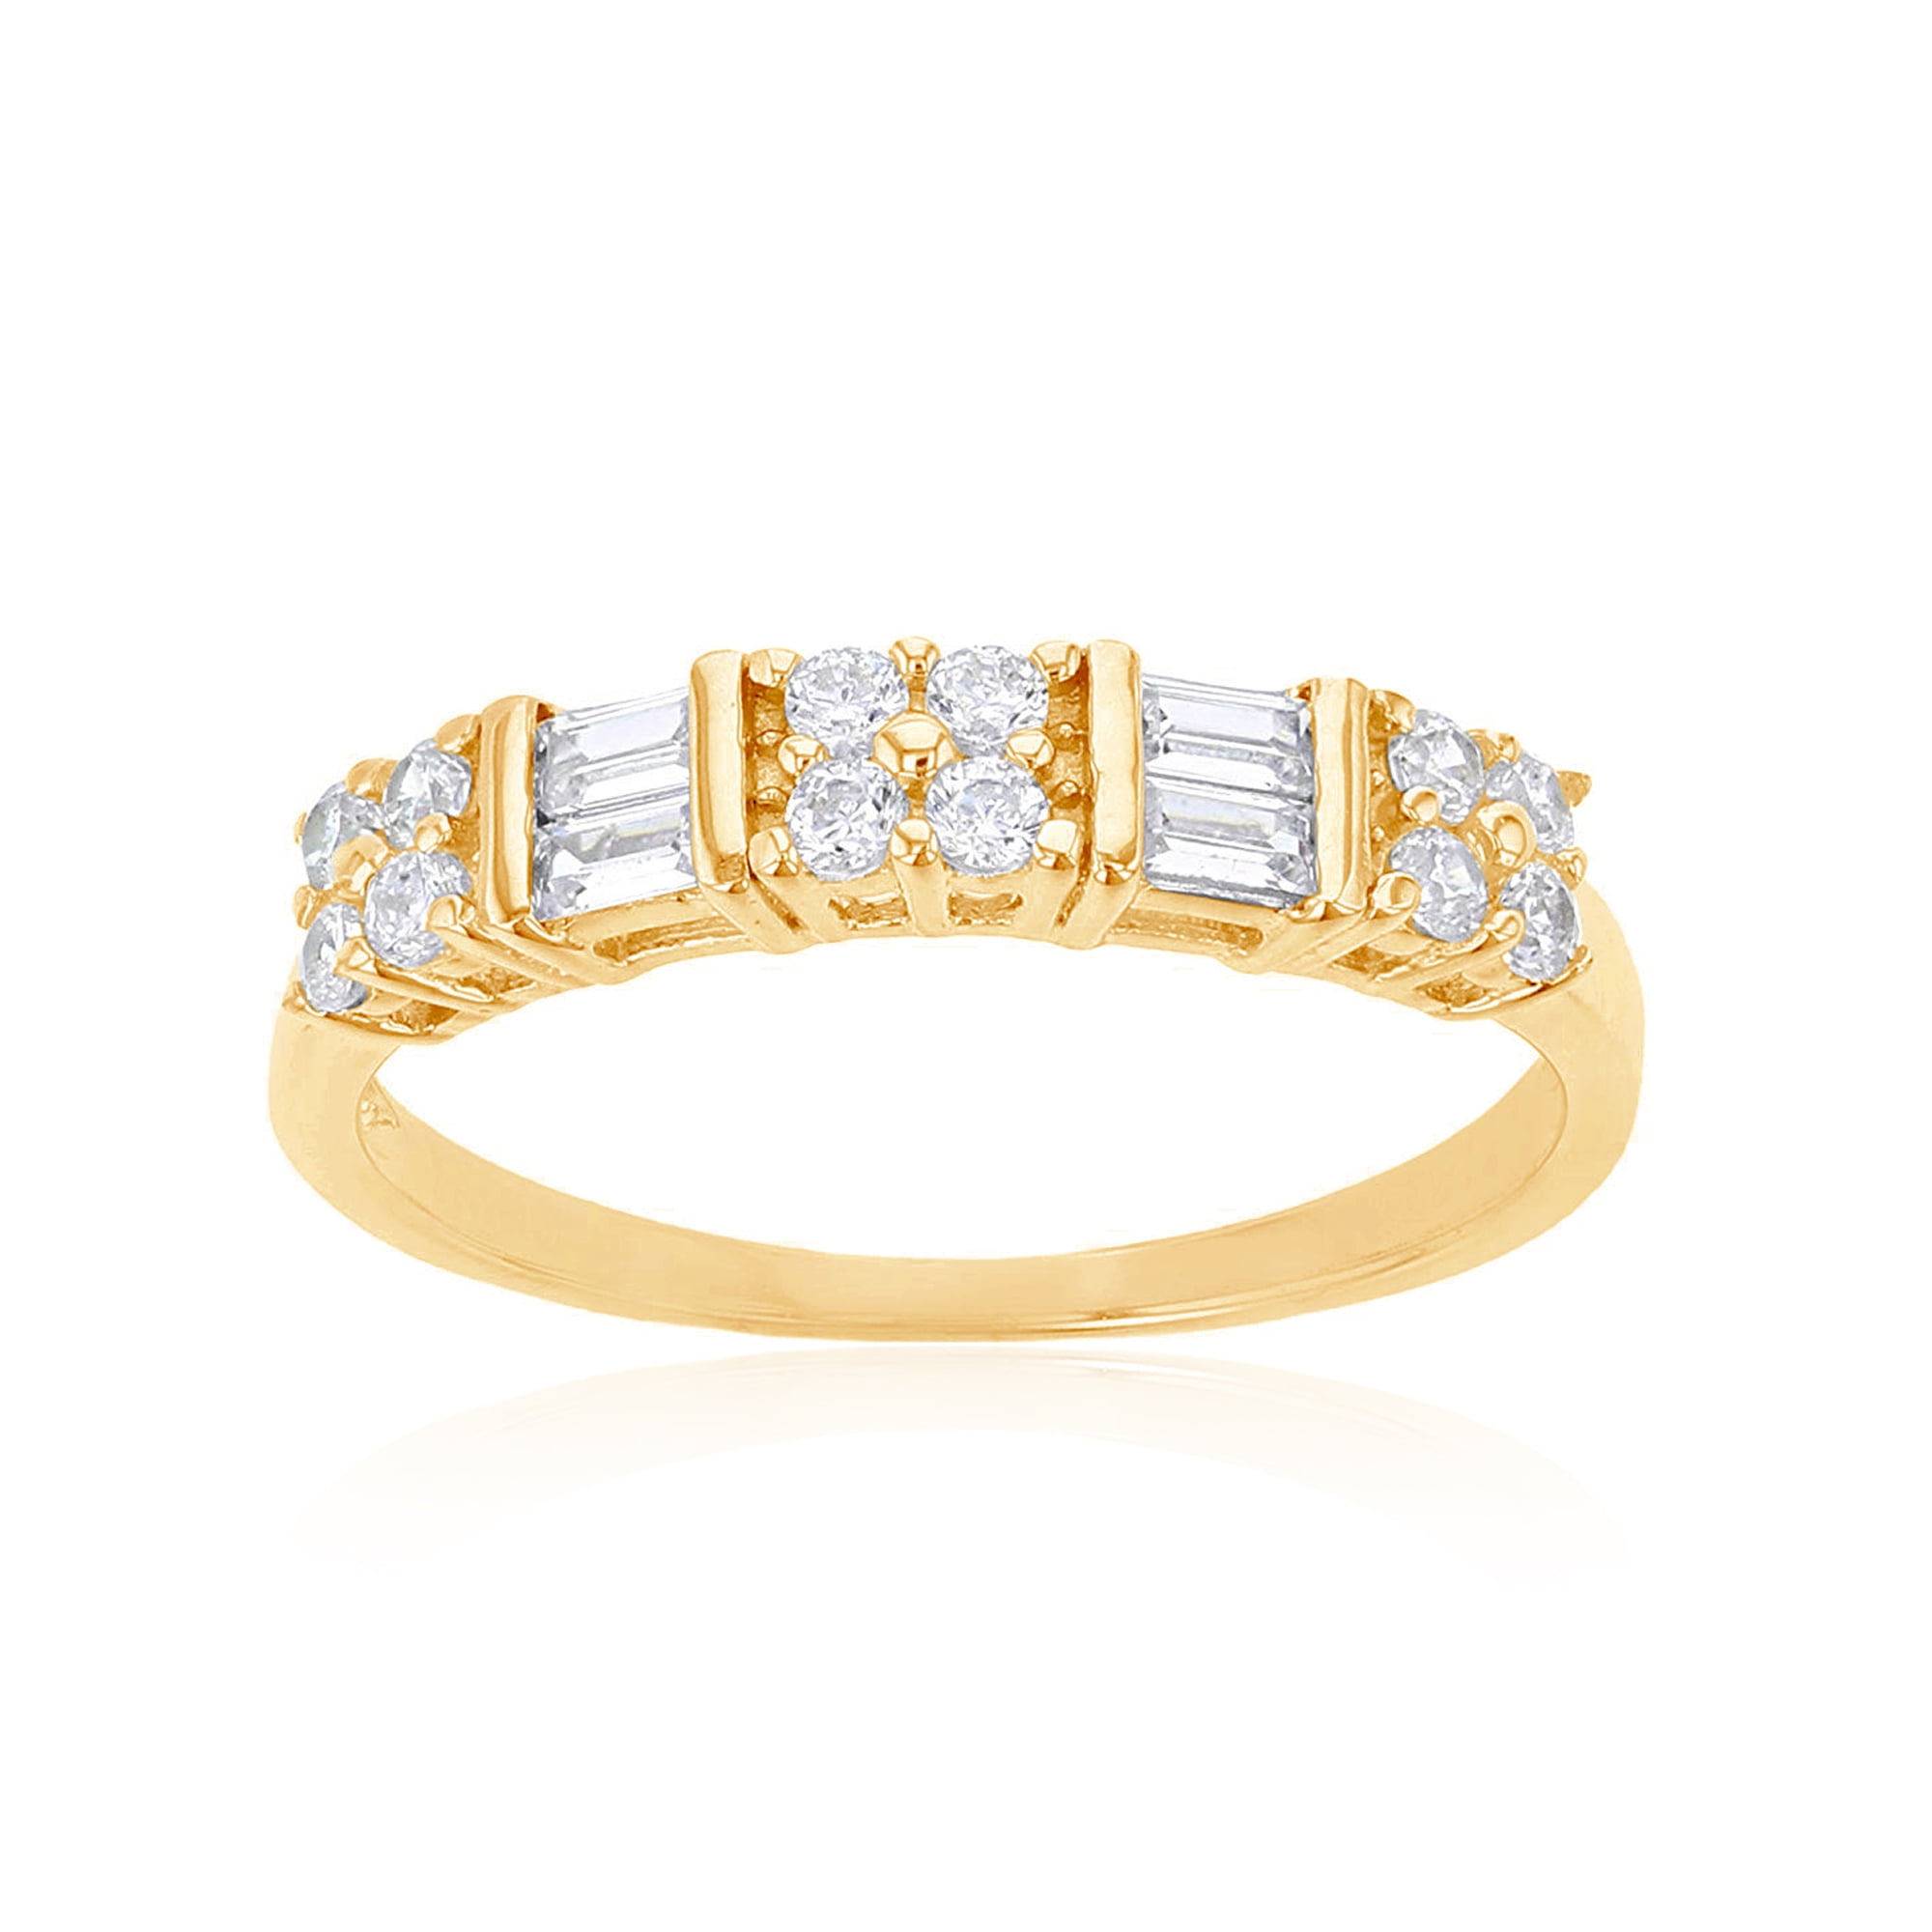 Clear CZ Thin Stackable Ring,14k Yellow Gold Half Eternity Cubic Zirconia Channel Ring,Size 6-9 